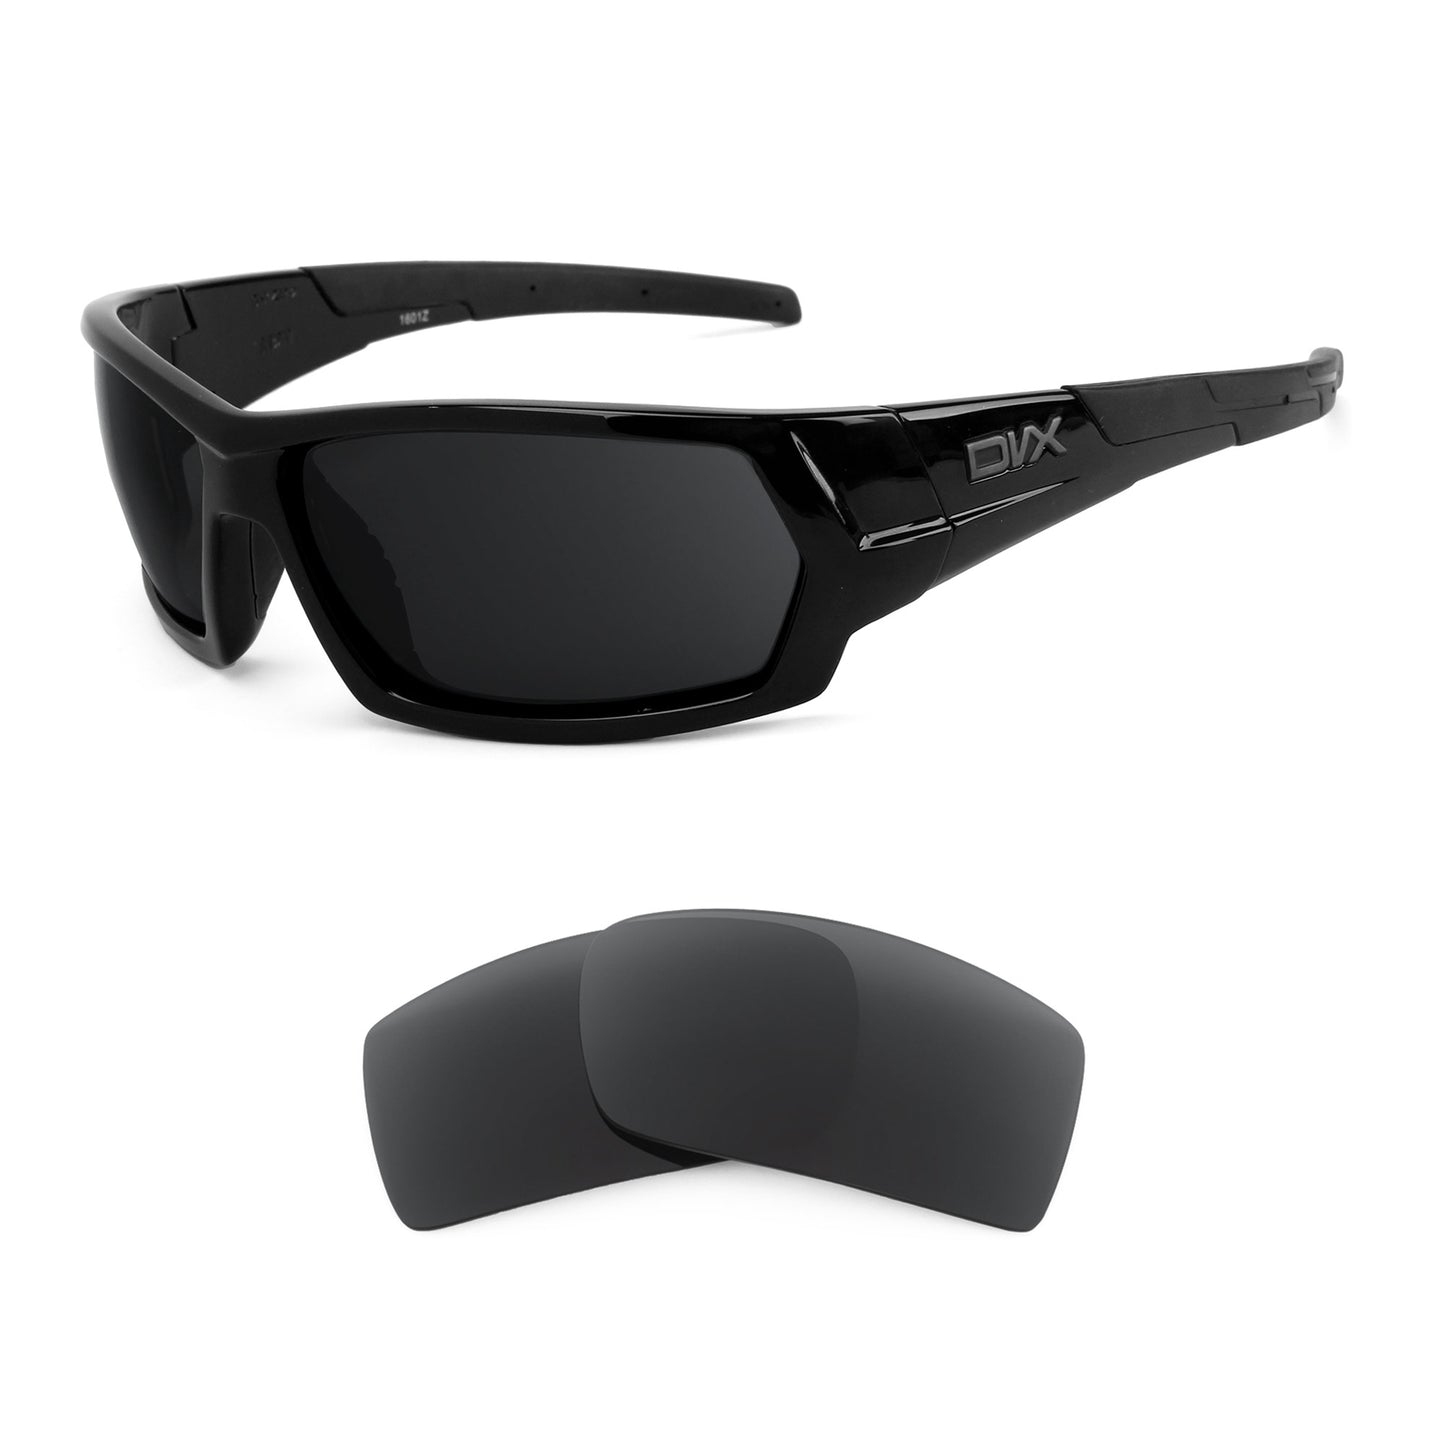 DVX Eyewear Next sunglasses with replacement lenses